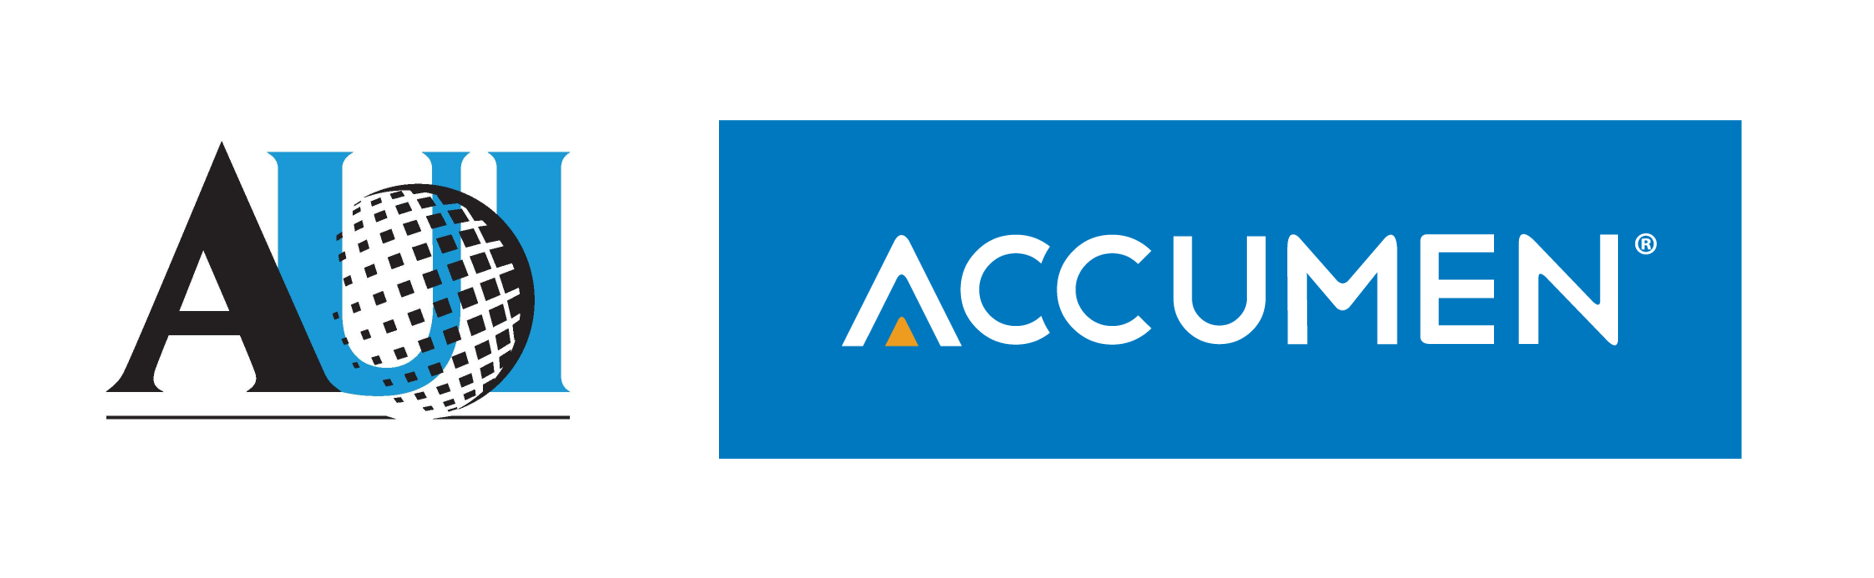 AUI and Accumen Partner to Increase Crisis Resilience to Natural and Manmade Disasters for Healthcare Sector